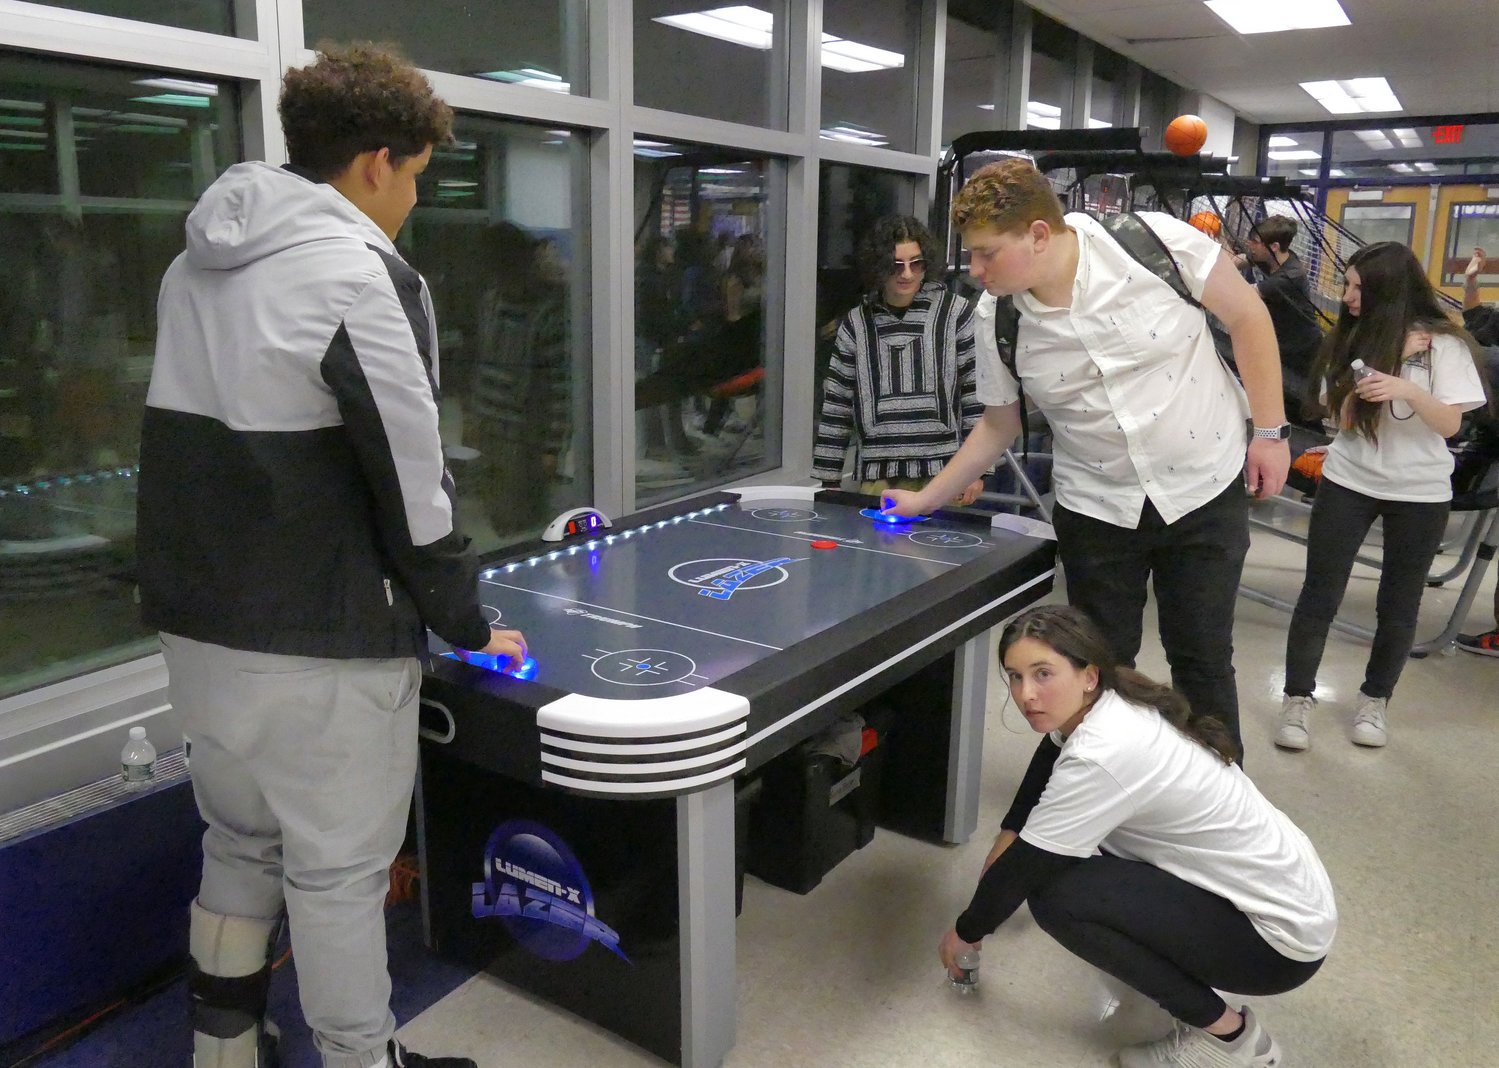 Air hockey was one of the options for students to play at teen night.